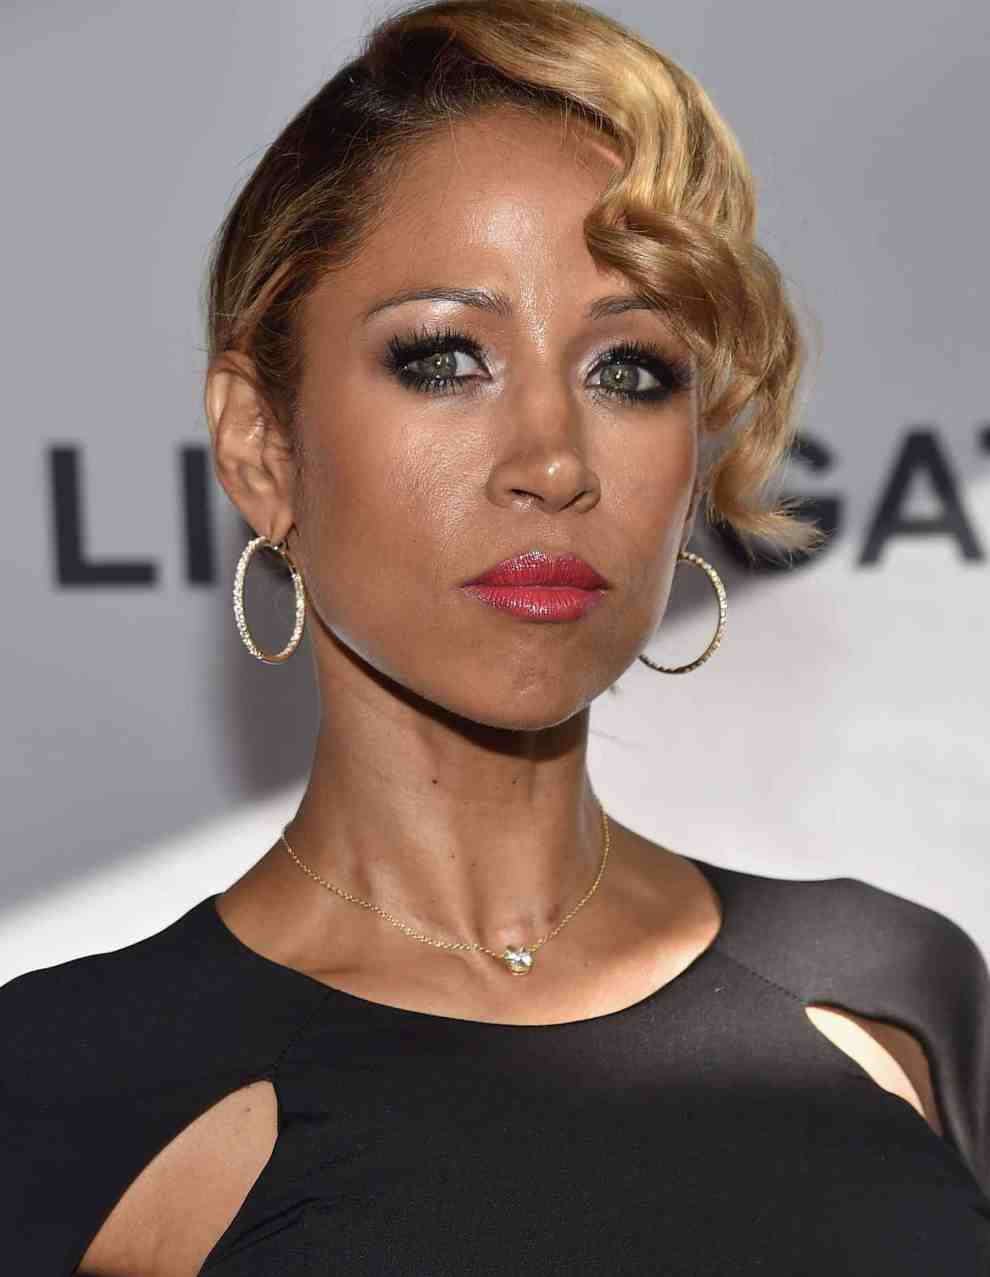 Stacey Dash attends  the premiere of Lionsgate Films' 'America' at Regal Cinemas L.A. Live on June 30